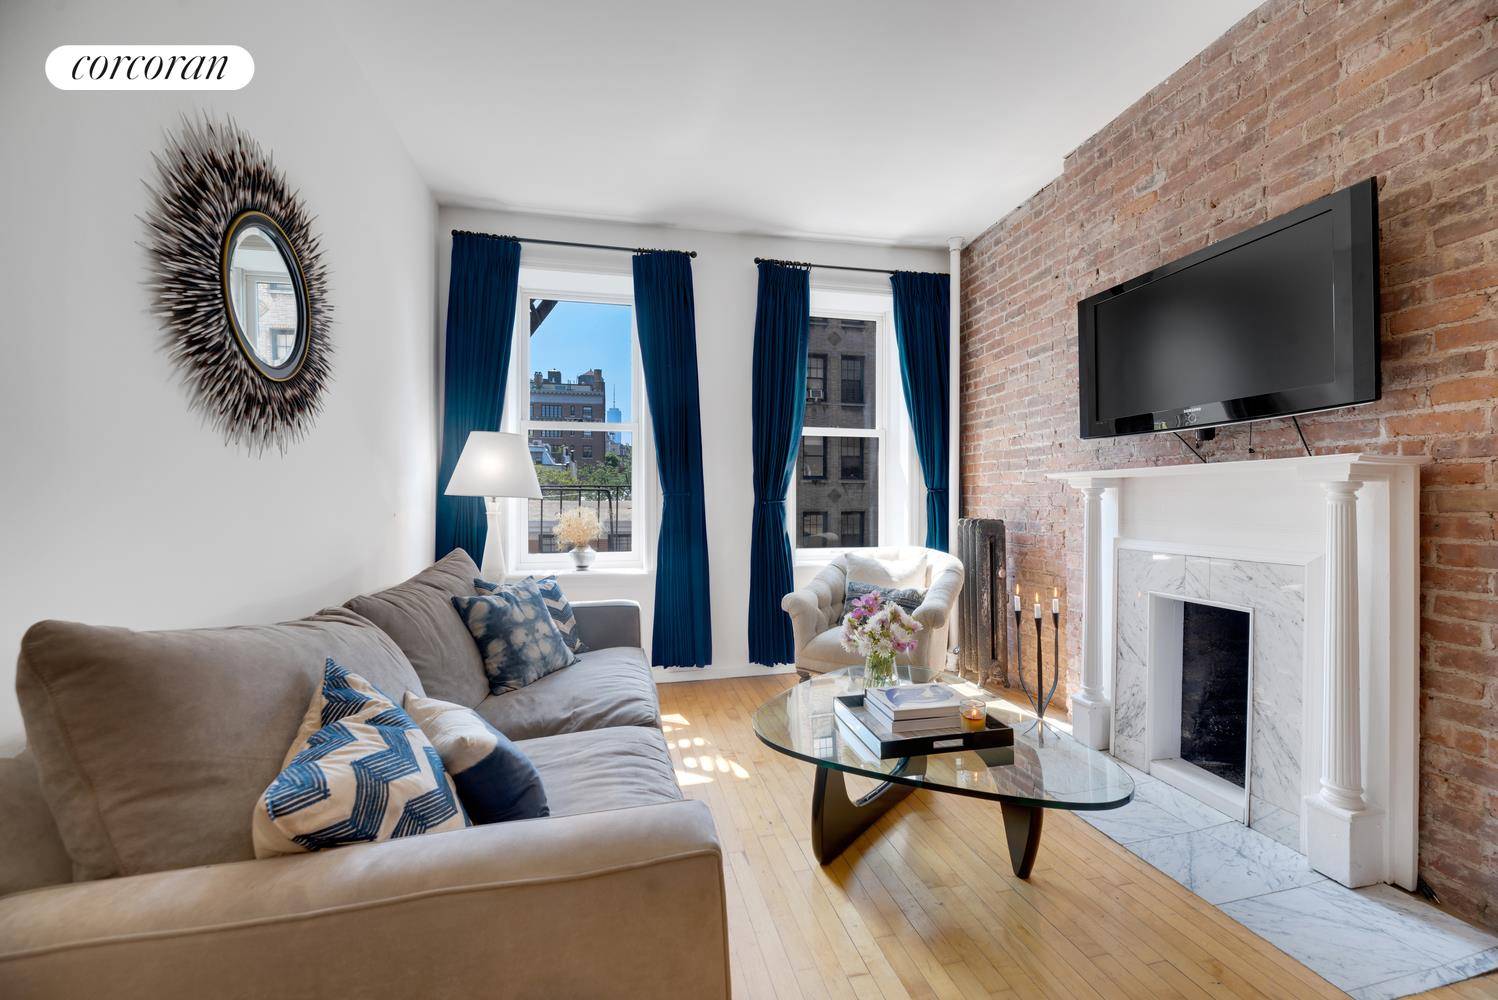 Charming Gold Coast co op apartment in the heart of Greenwich Village.